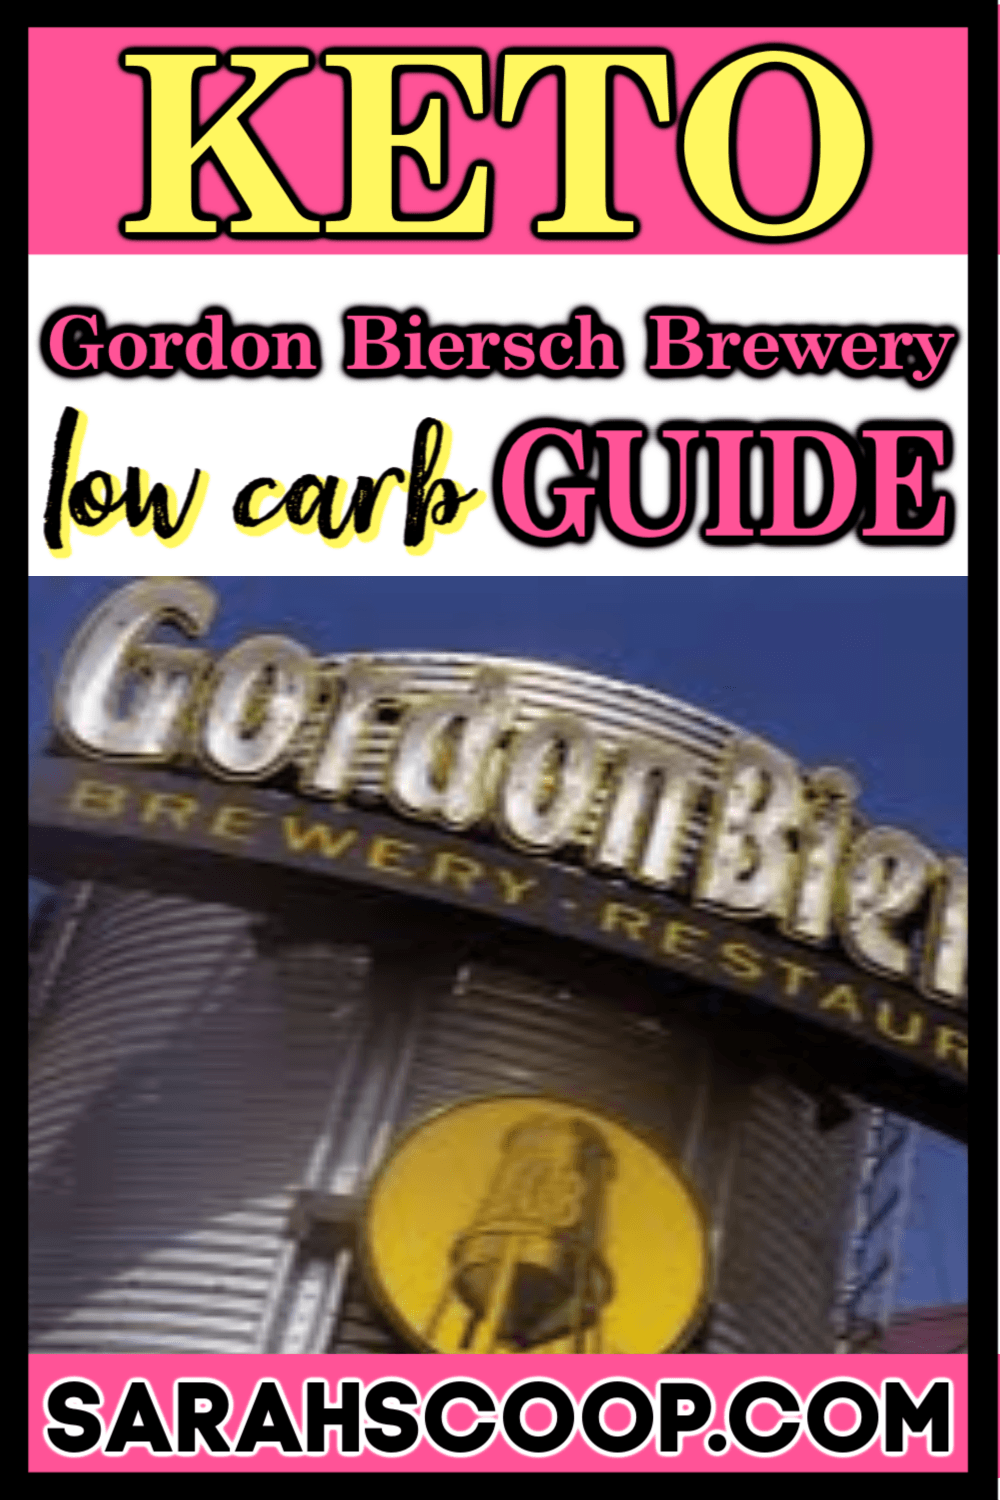 Low carb restaurant guide for keto enthusiasts by Gordon Schreiber at a brewery.